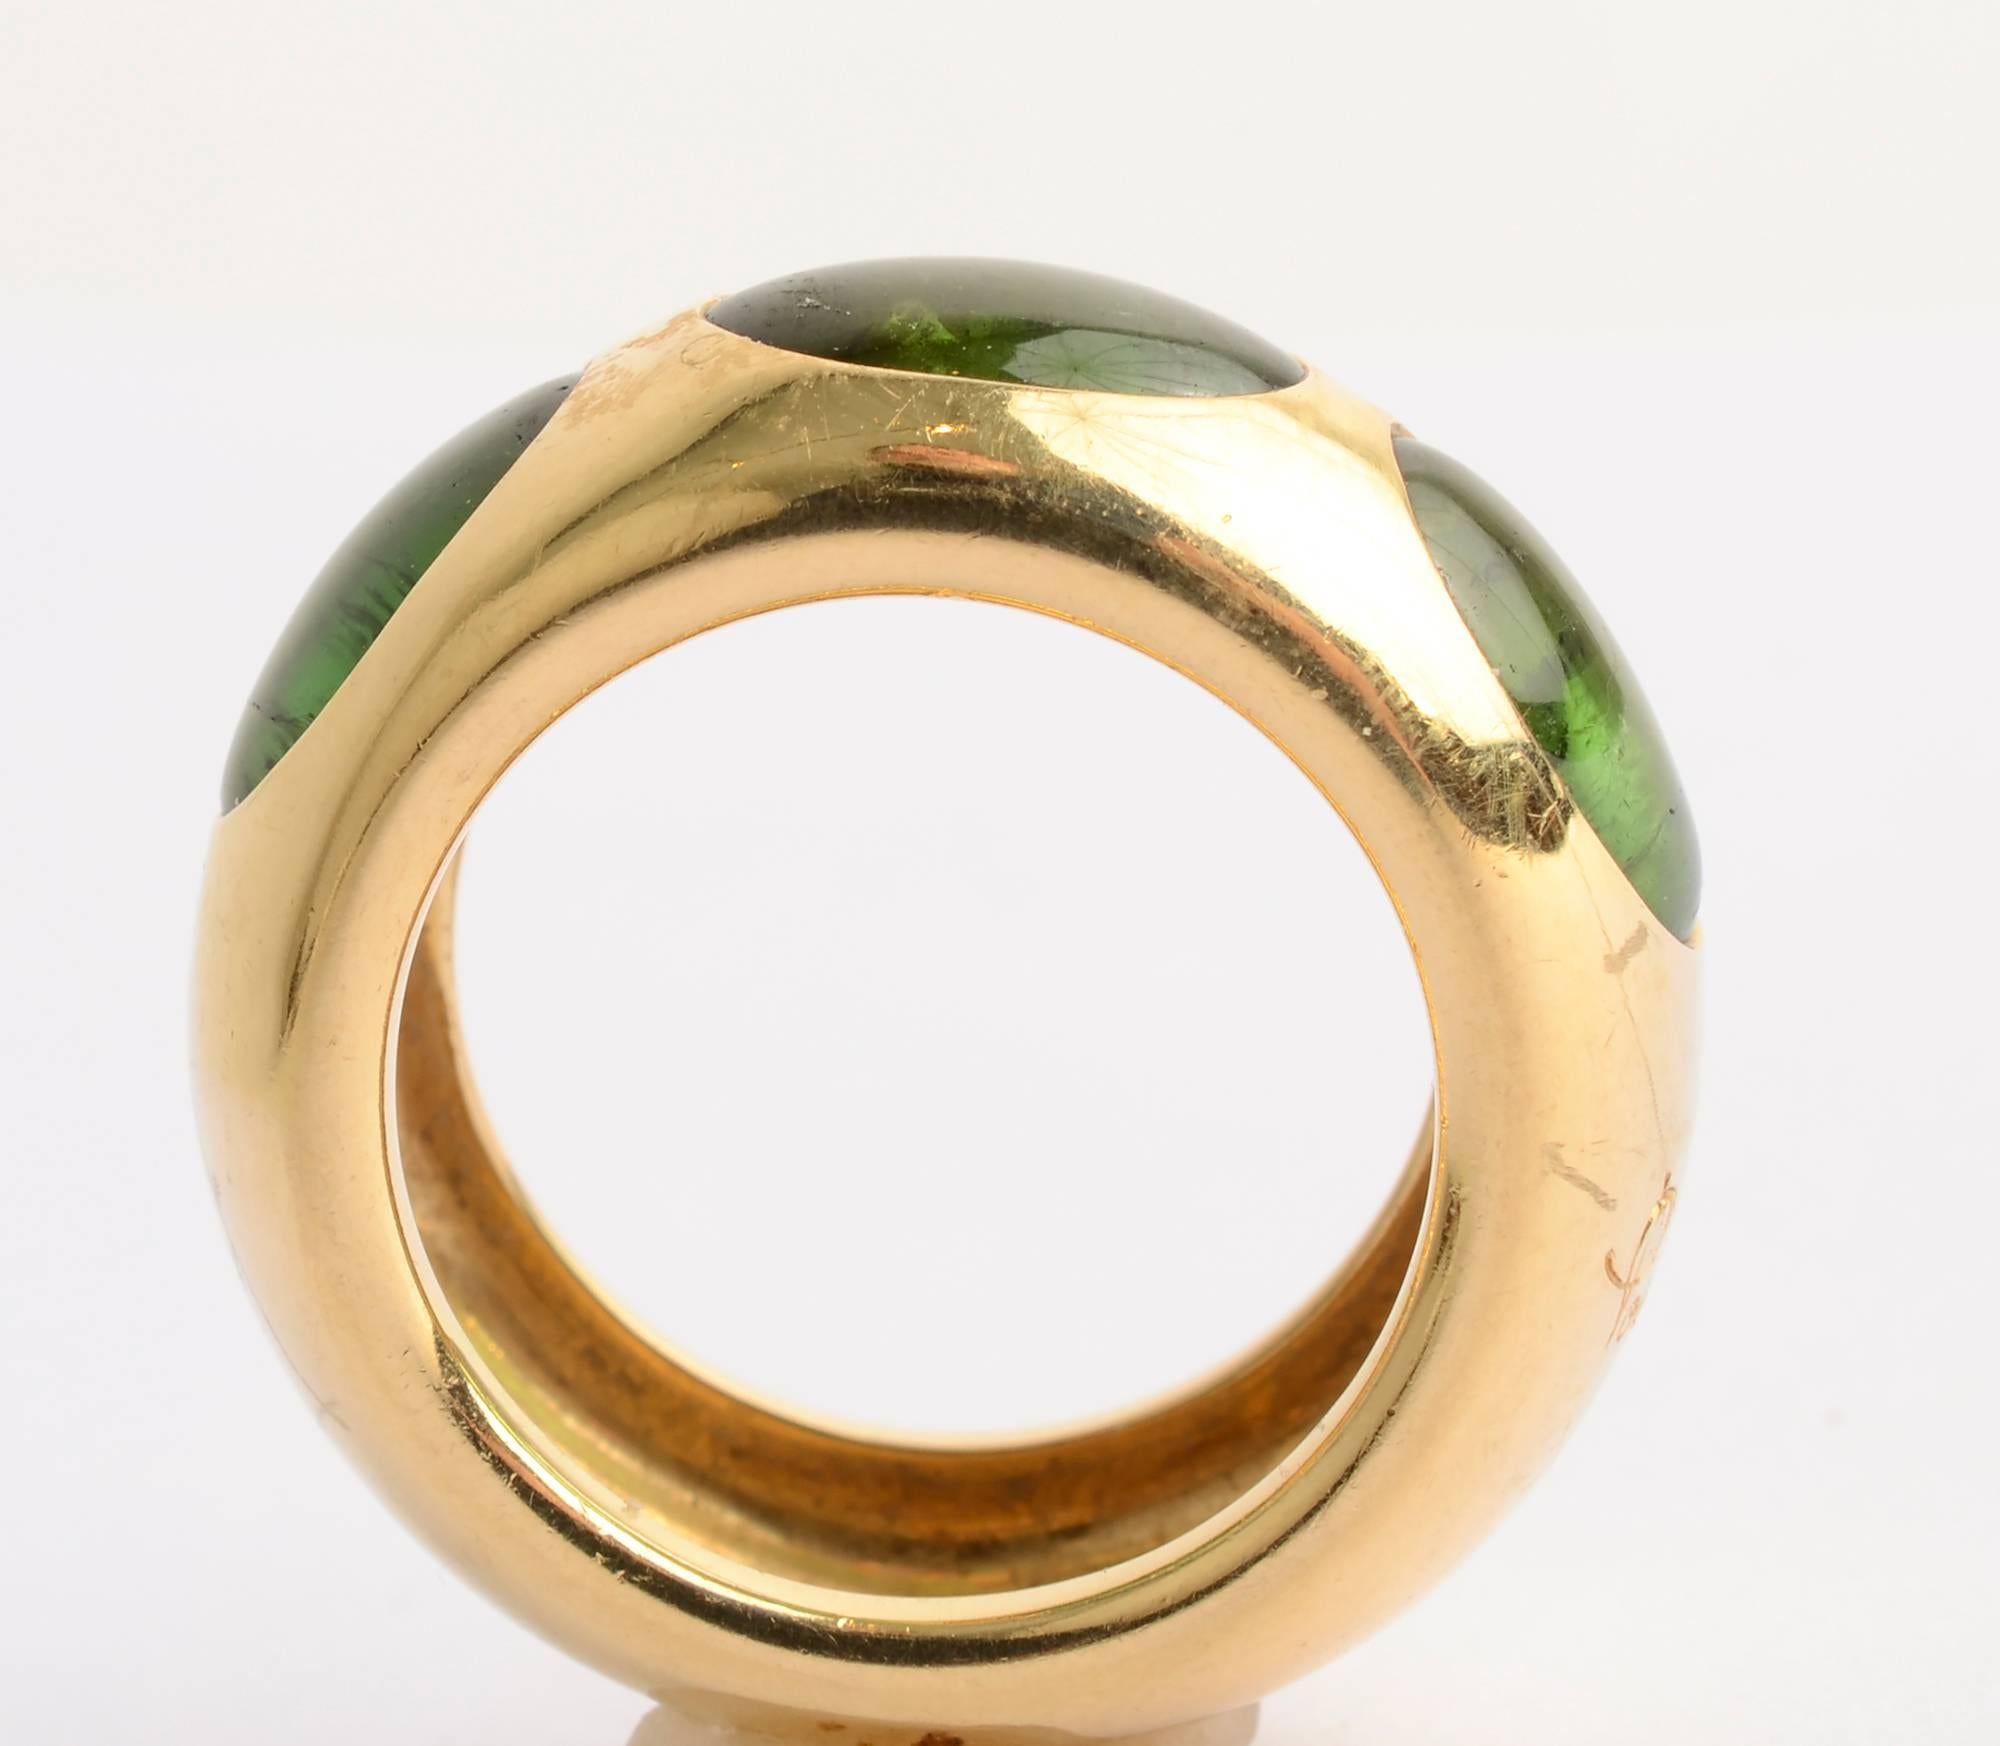 Substantial 18 karat gold ring by Pomellato with three green tourmaline stones. The ring is 7/16 inch tall all around. 
What may initially appear to be scratches are actually the Pomellato logo written on the outside of the ring. There are, however,